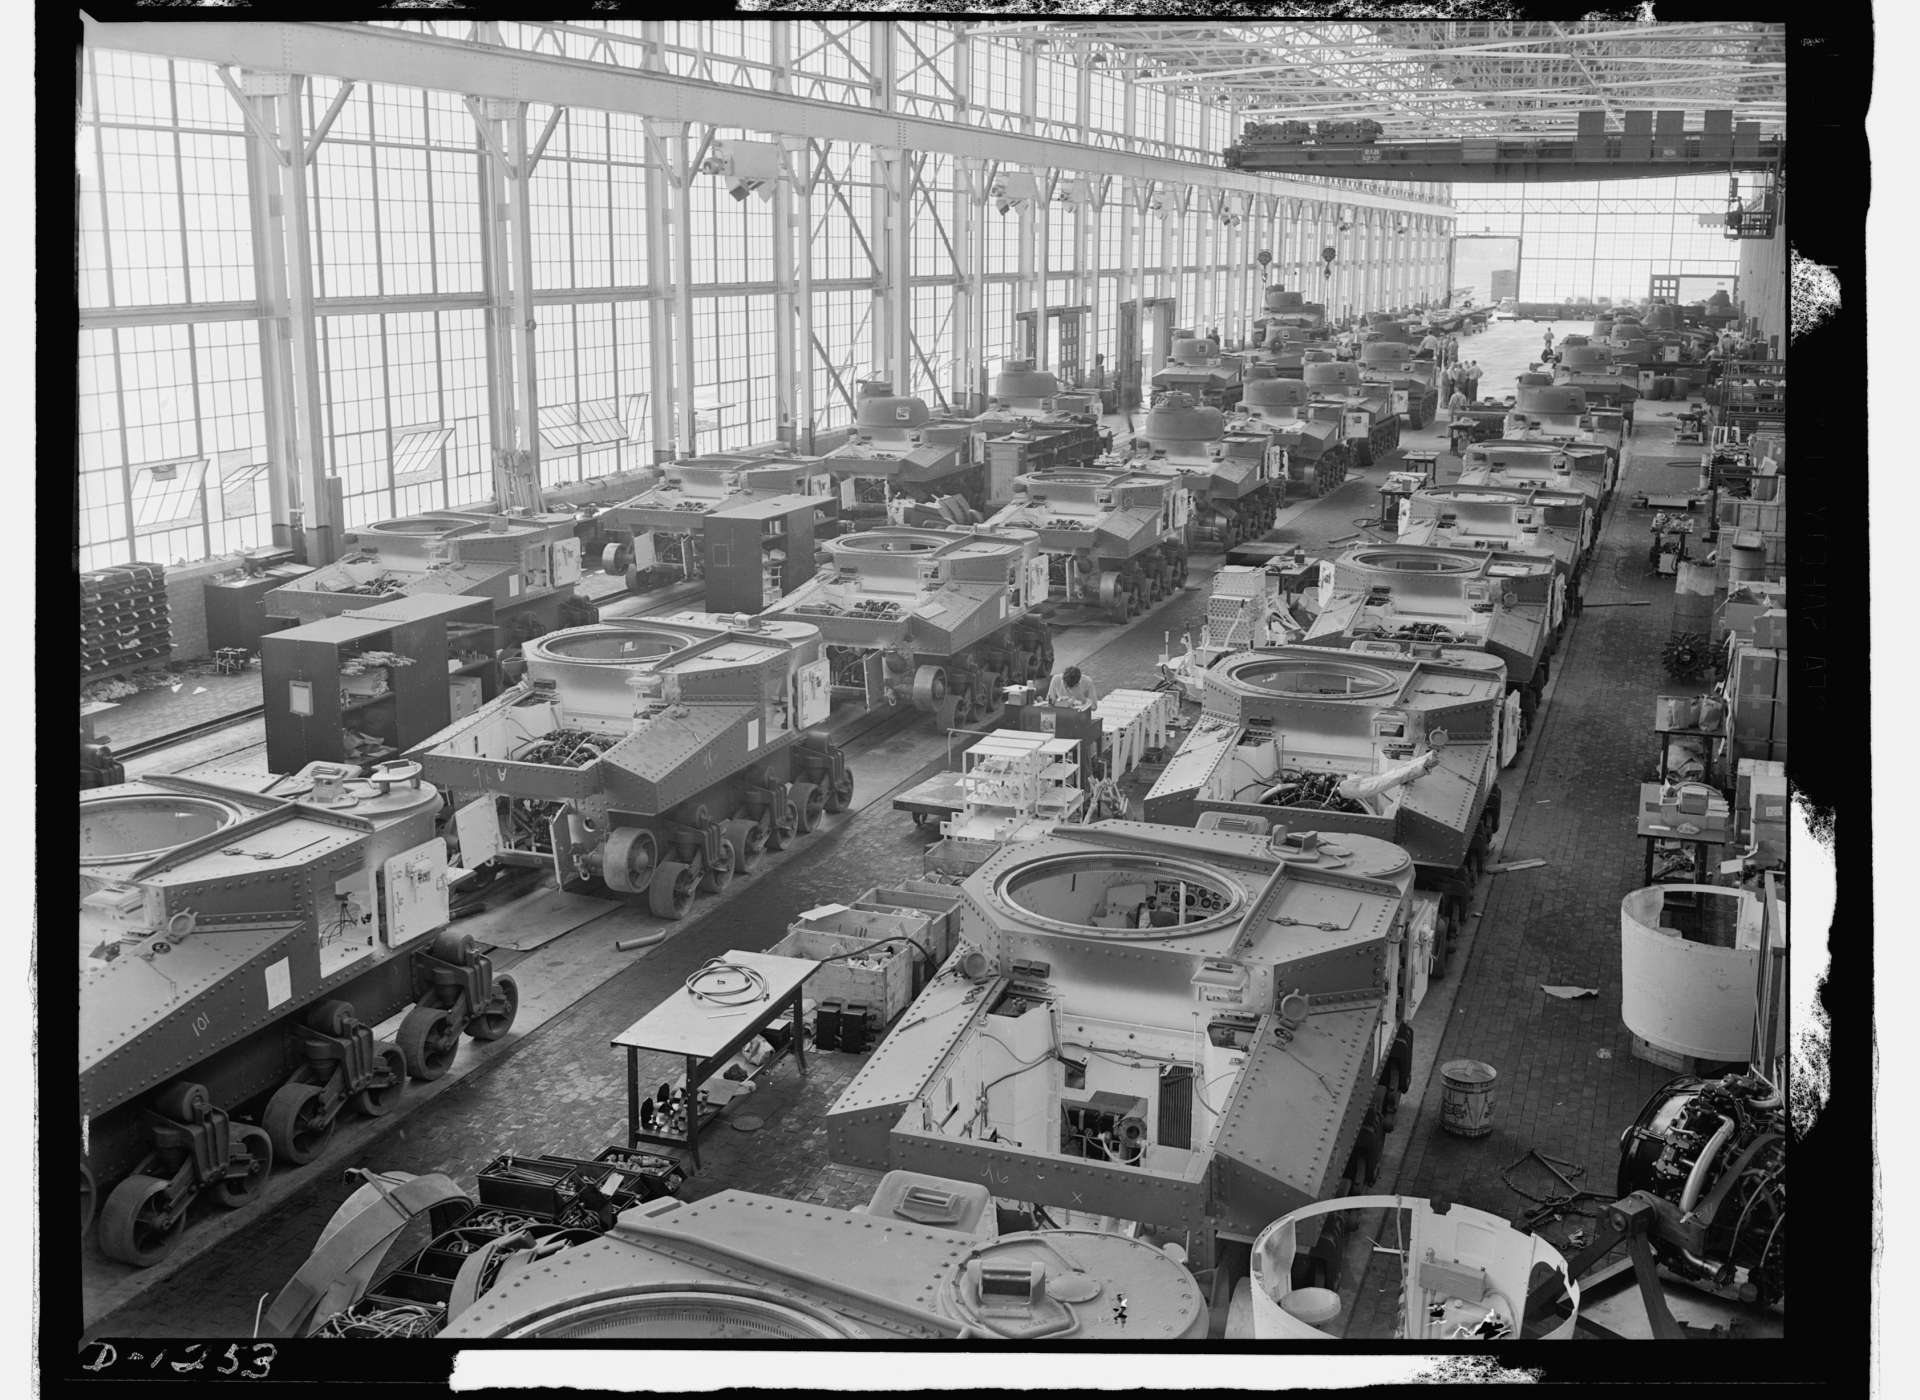 Tanks move along an assembly line that produced cars and trucks before the war at Chrysler in Detroit